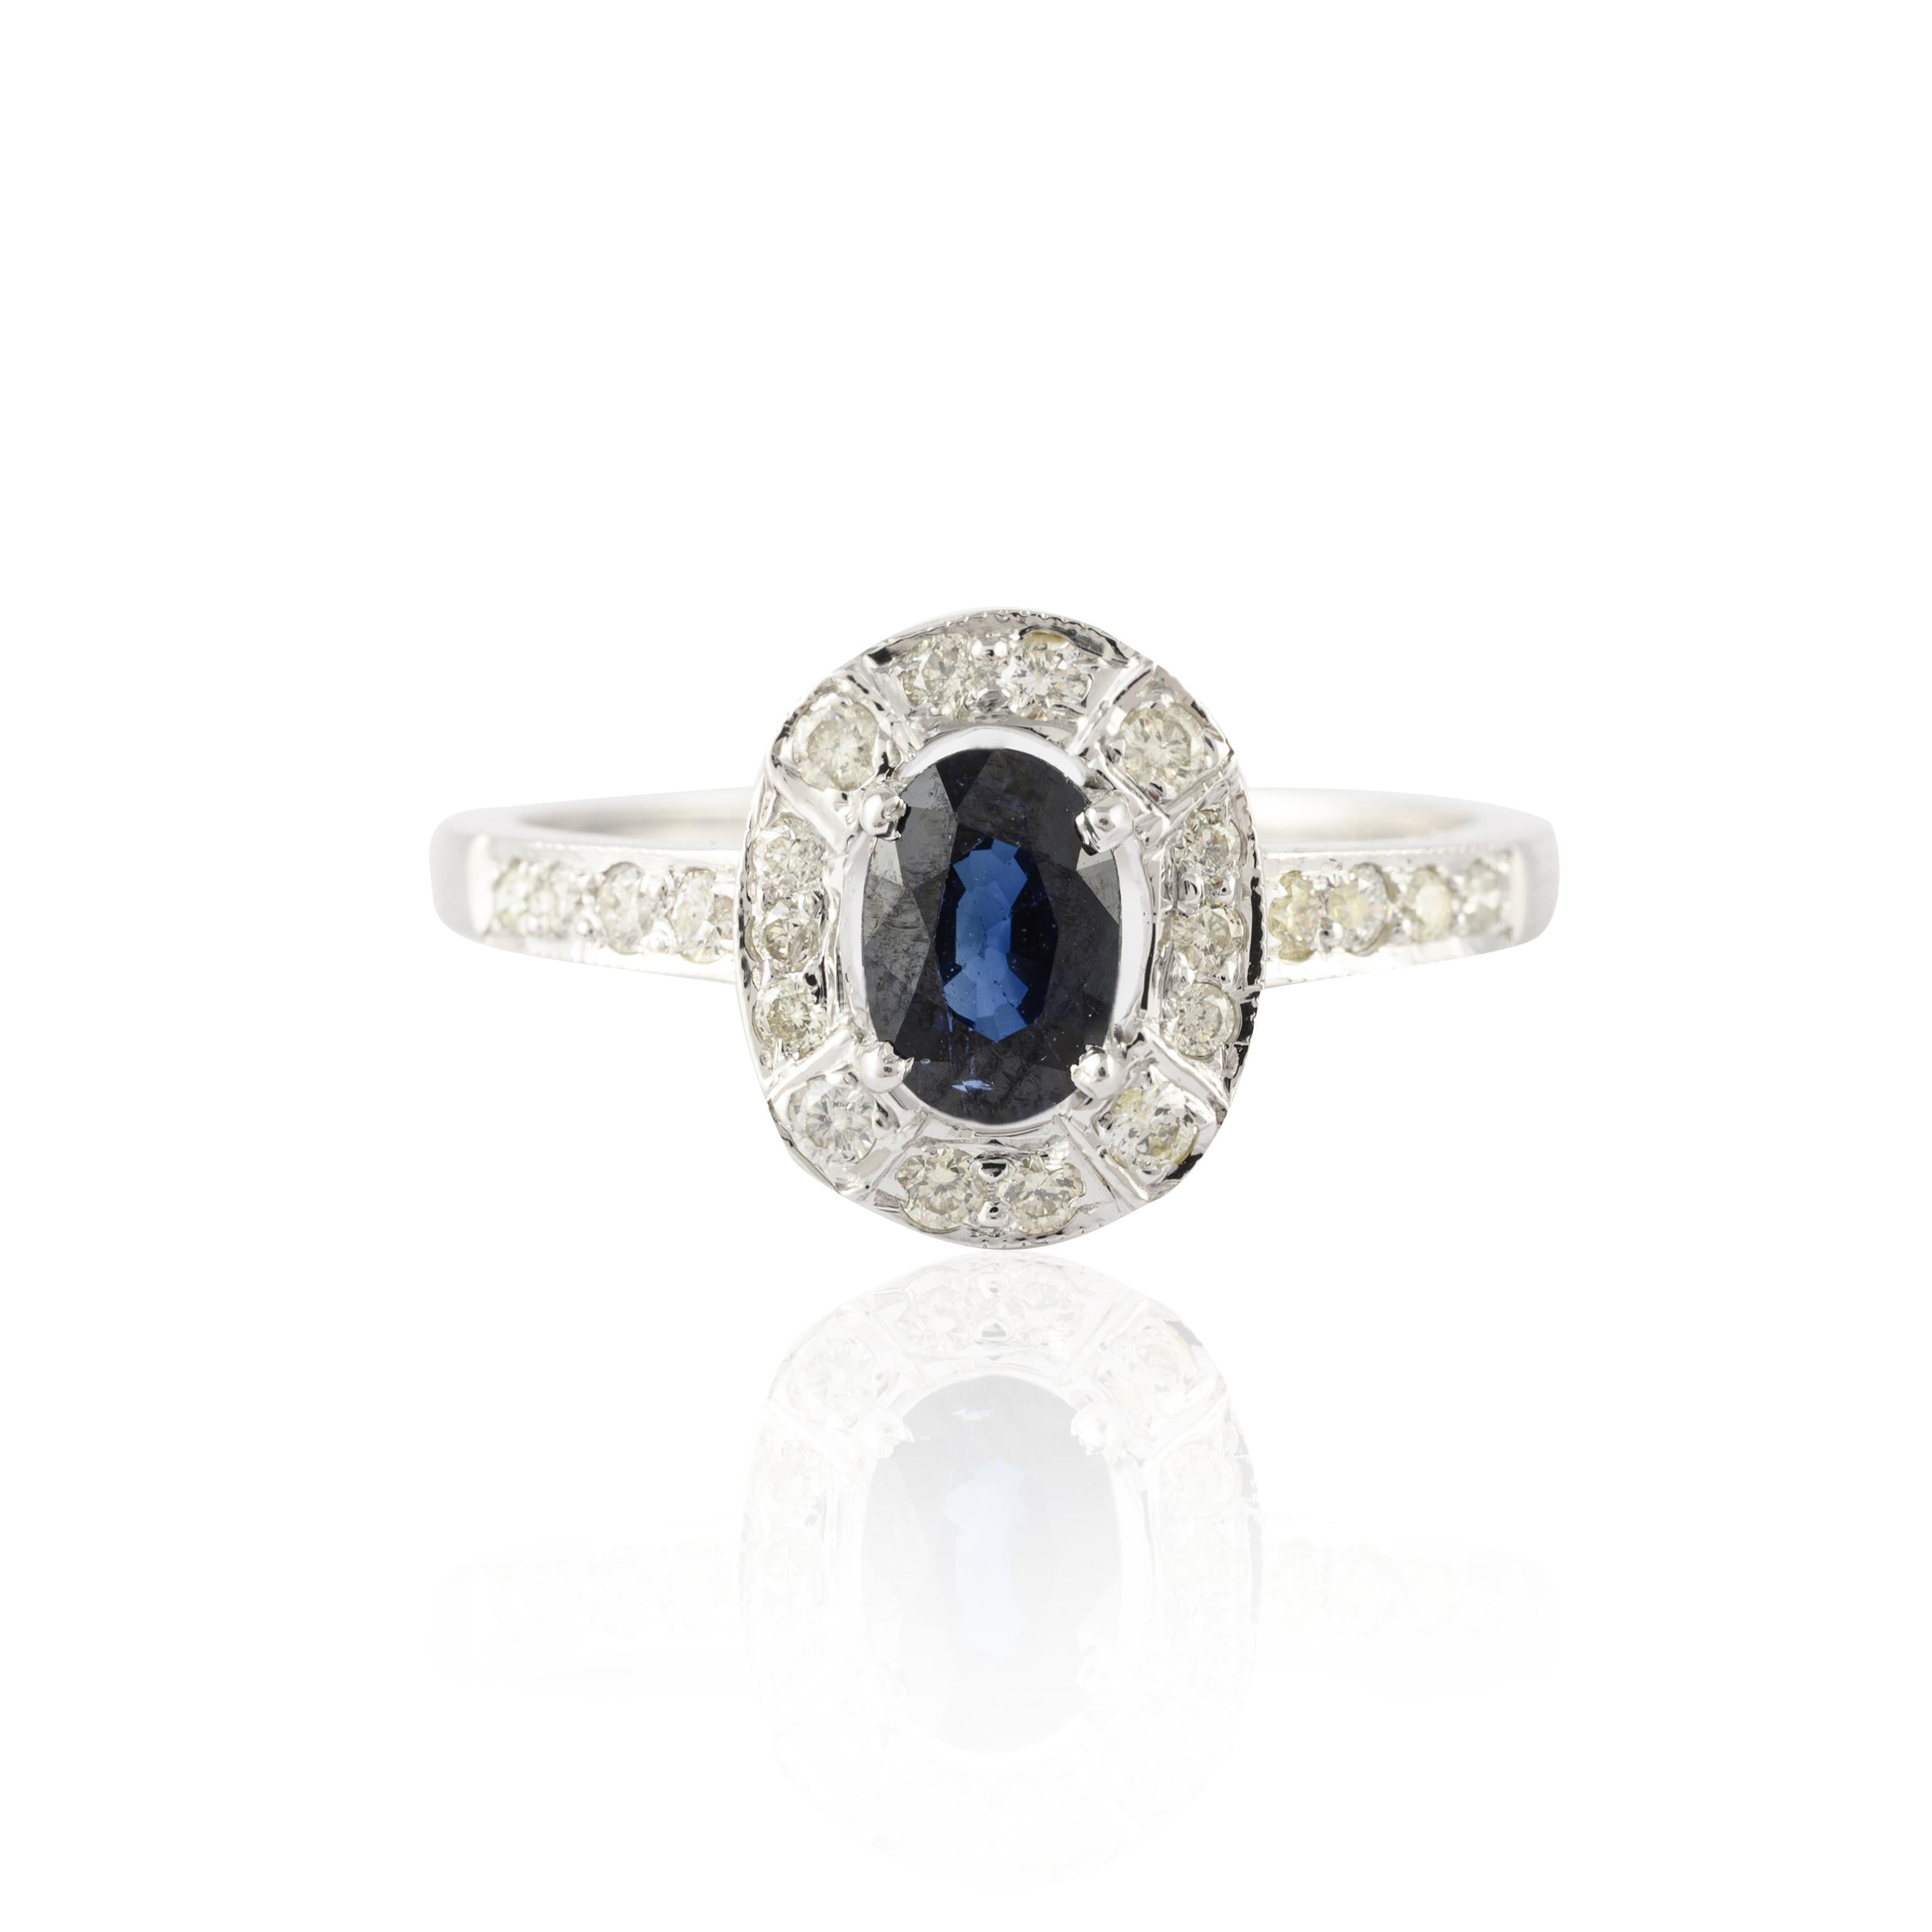 For Sale:  Simple 14K Solid White Gold Halo Diamond and Blue Sapphire Women Engagement Ring 2